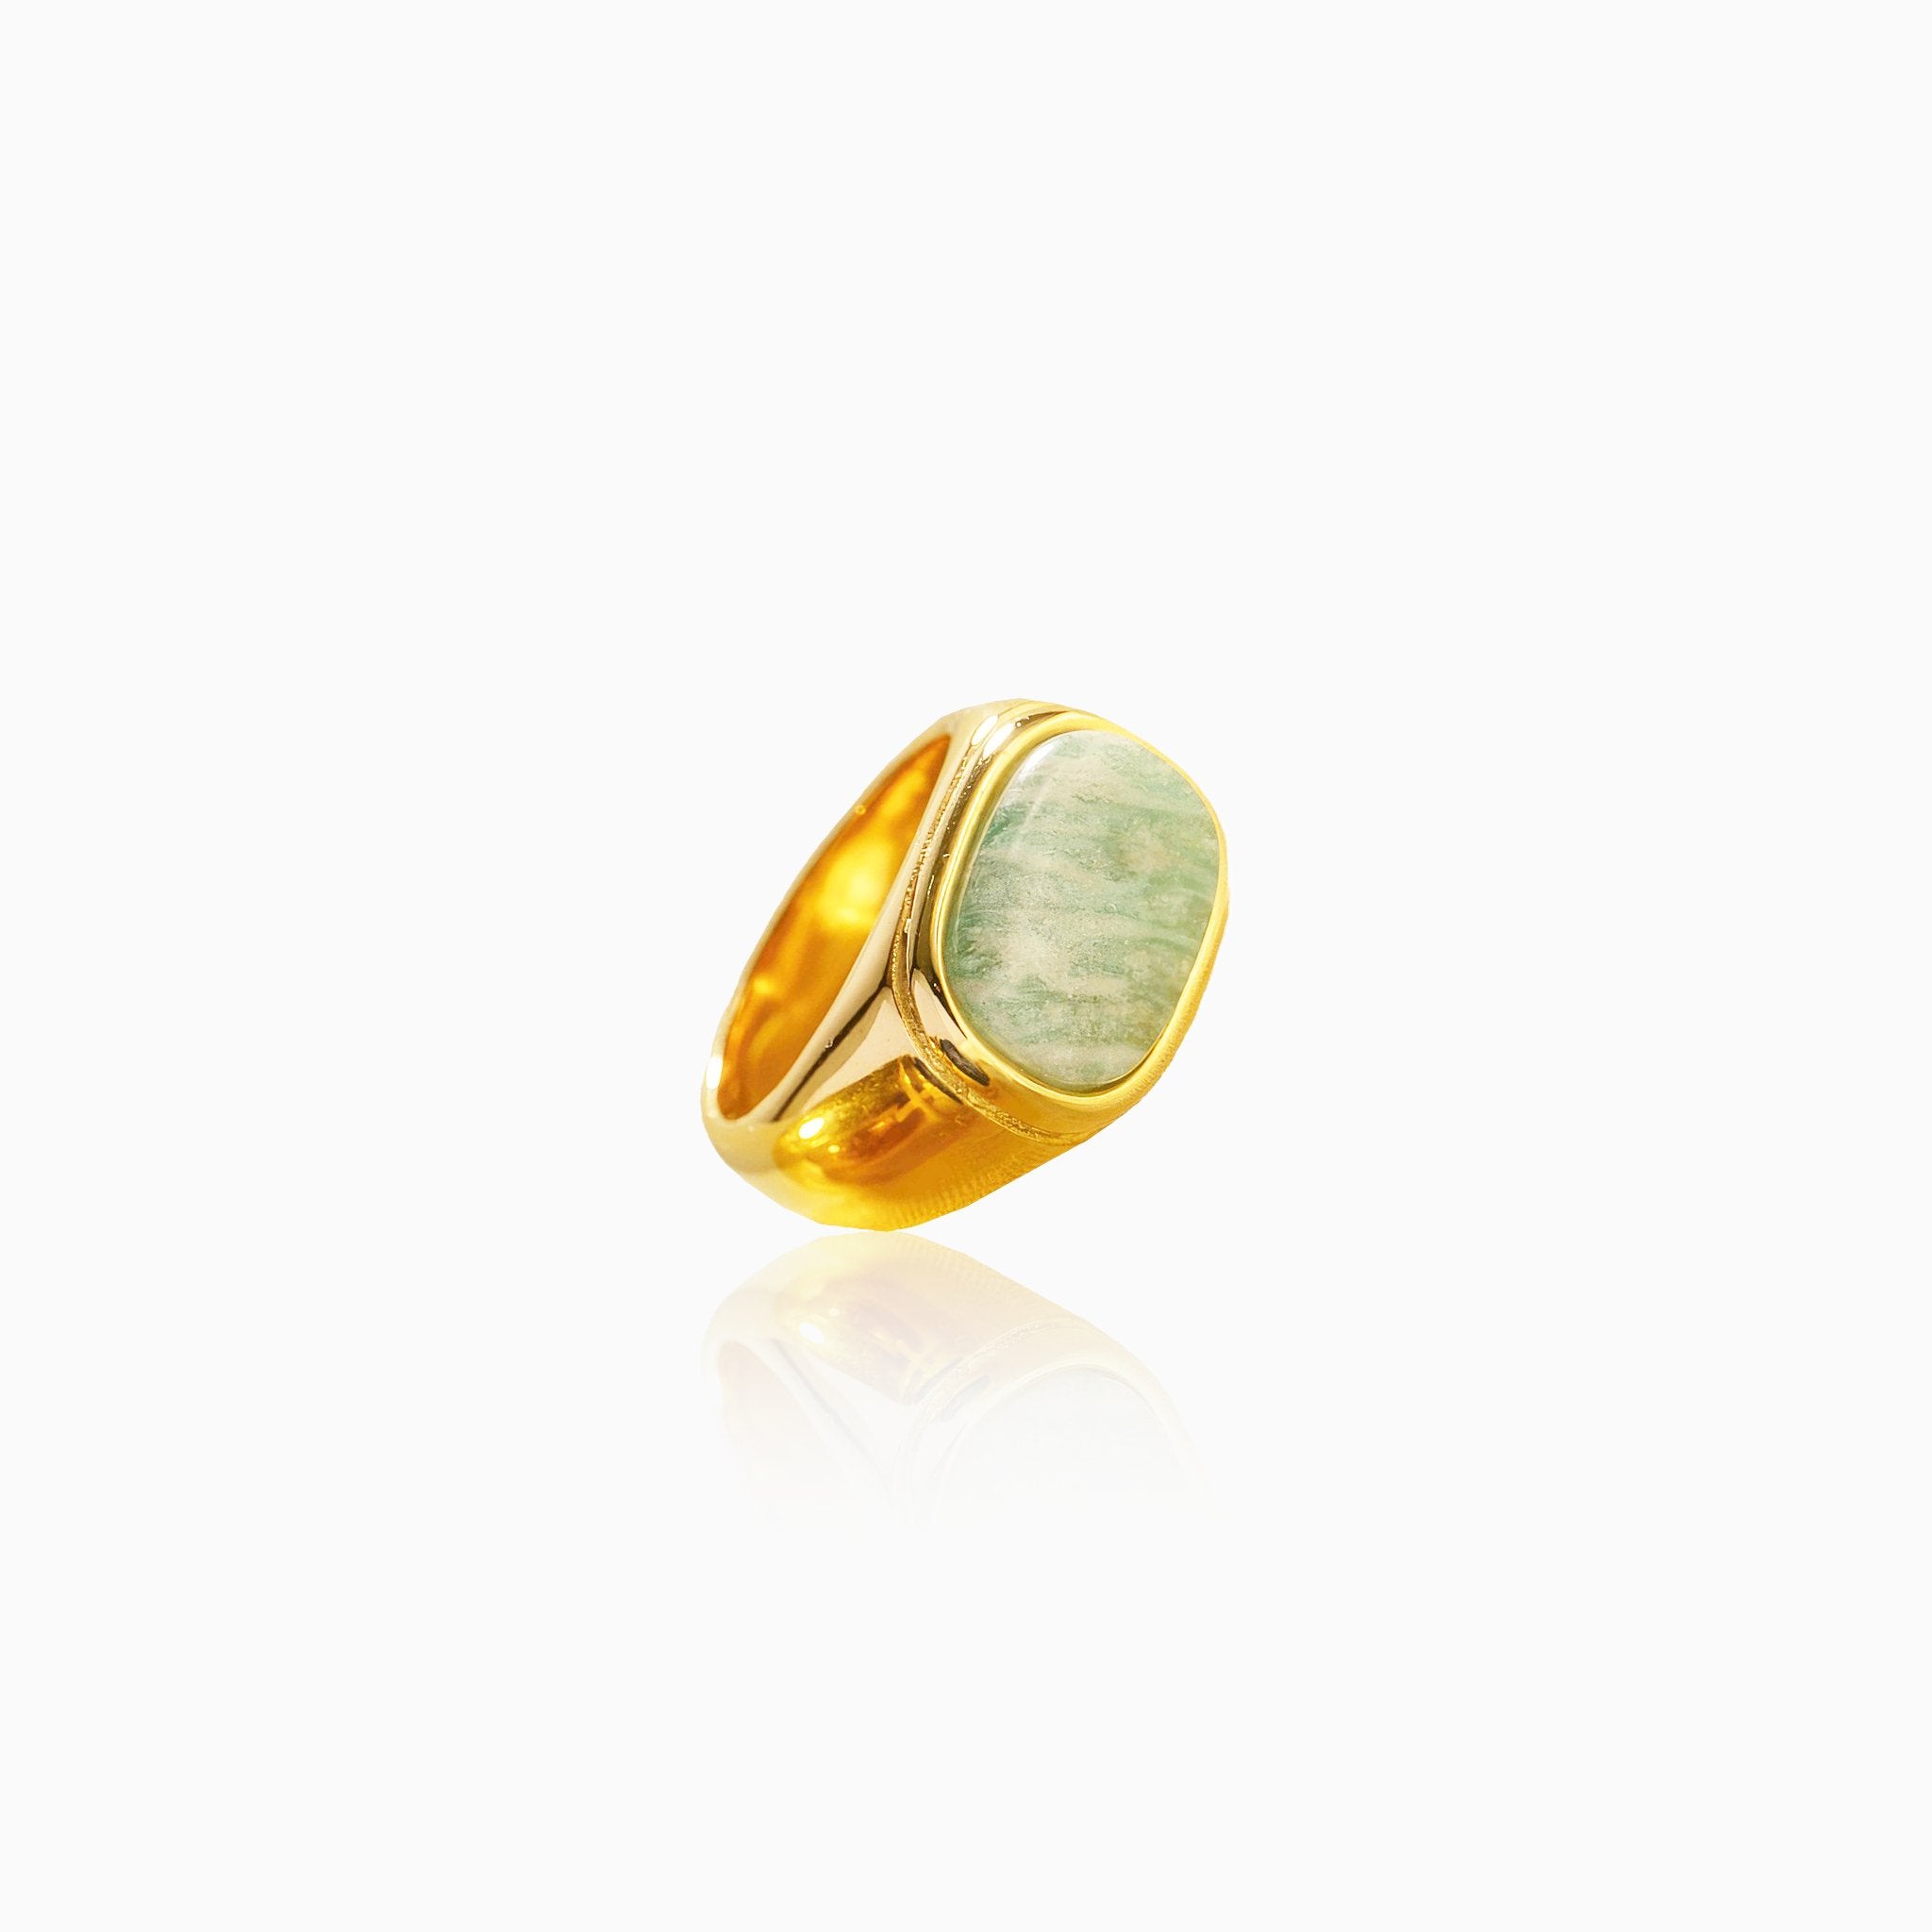 Geometric Ring with Natural Agate Stone - Nobbier - Ring - 18K Gold And Titanium PVD Coated Jewelry